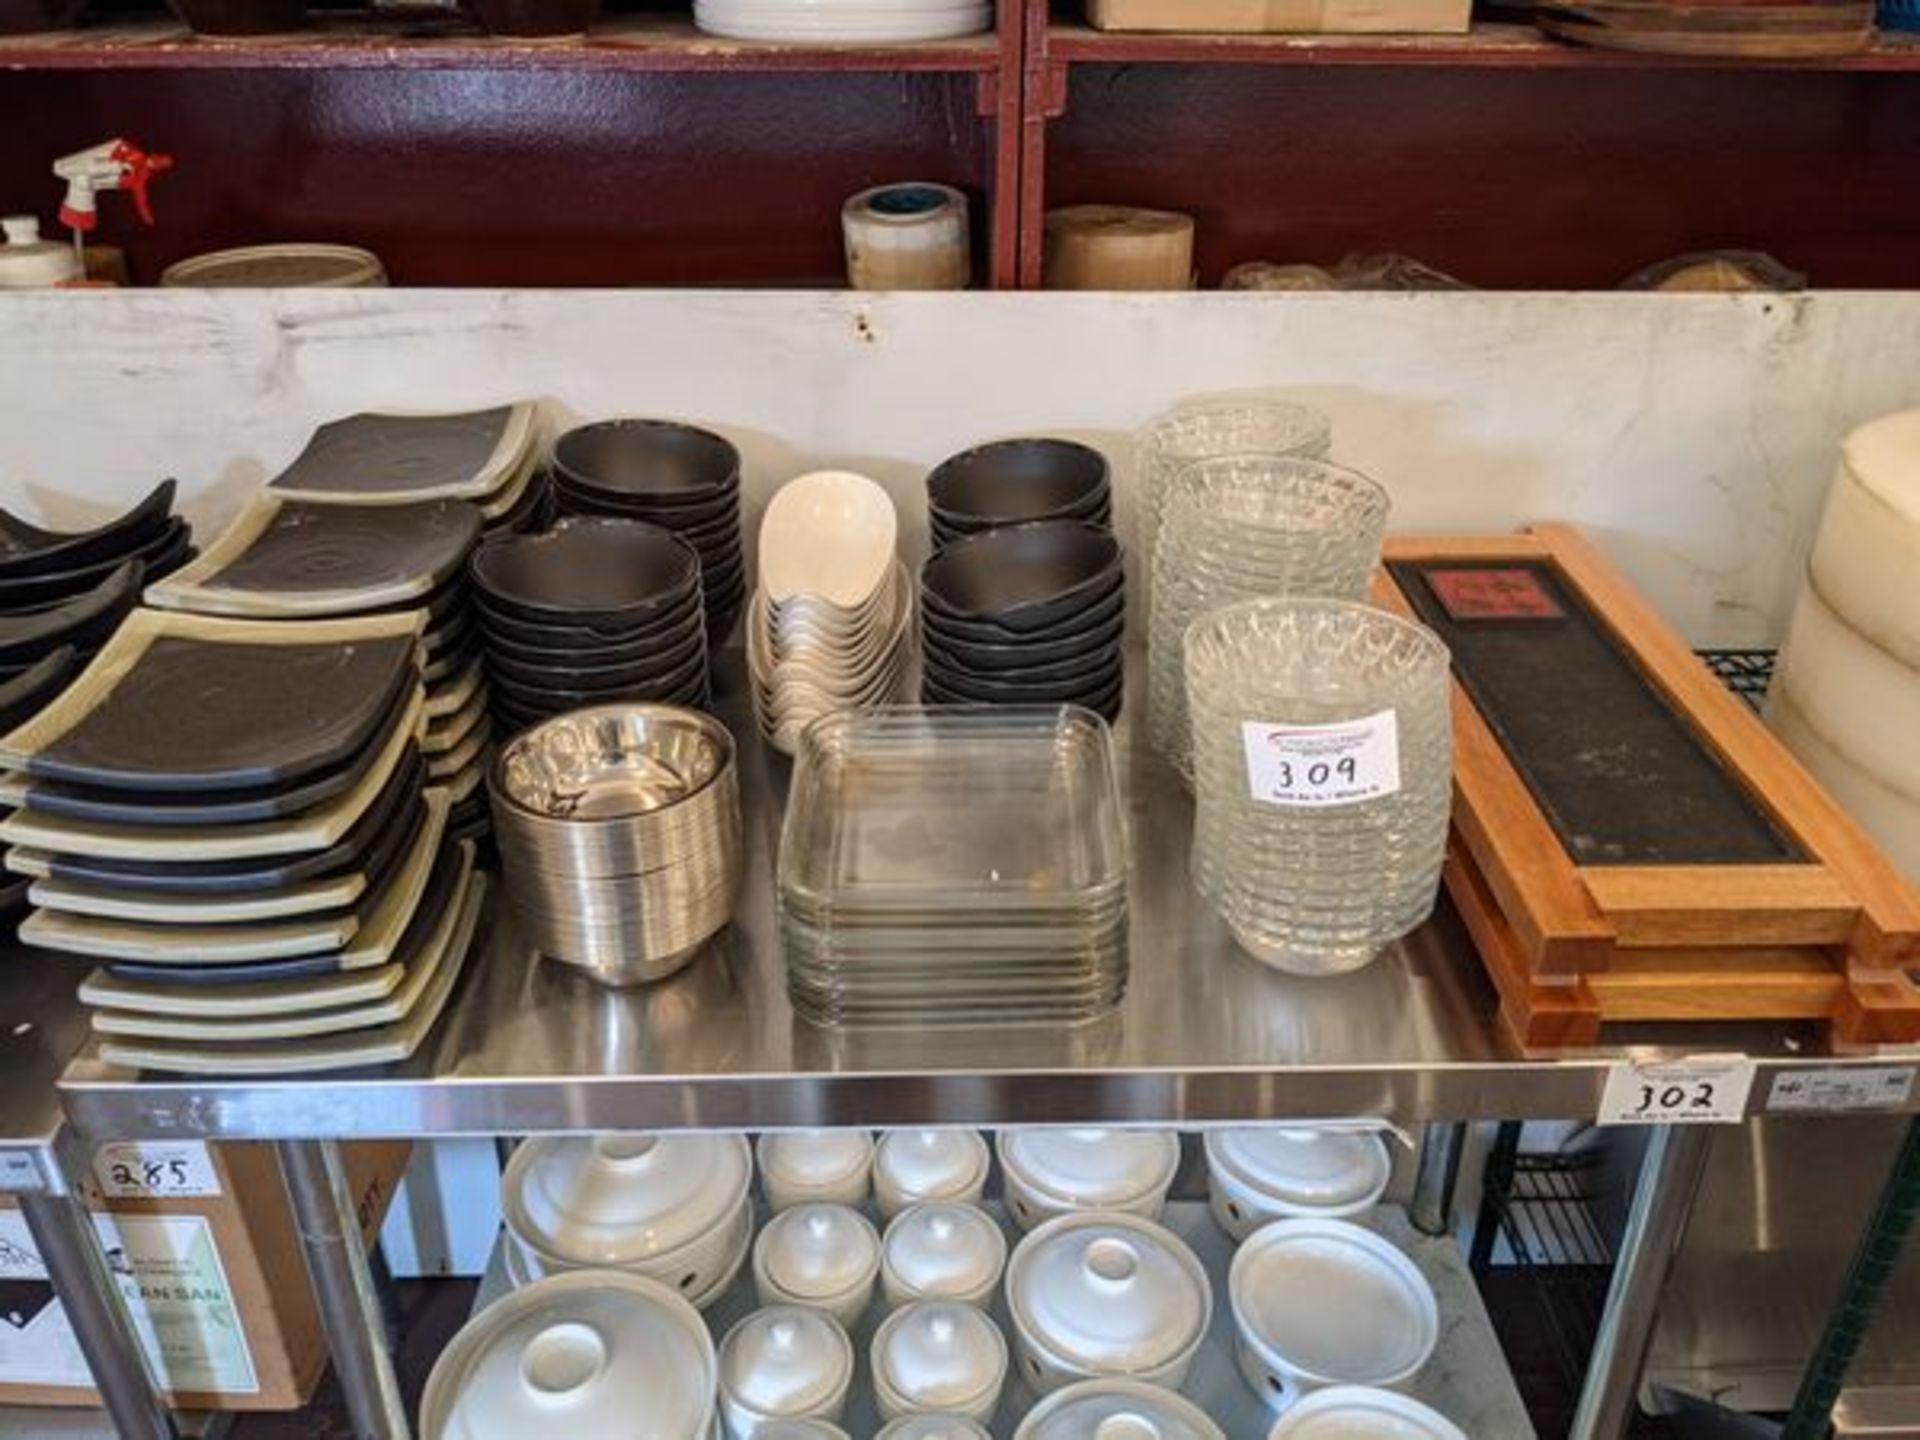 Table Lot of Assorted Dishware- Installed New in 2019 - Restaurant Never Opened